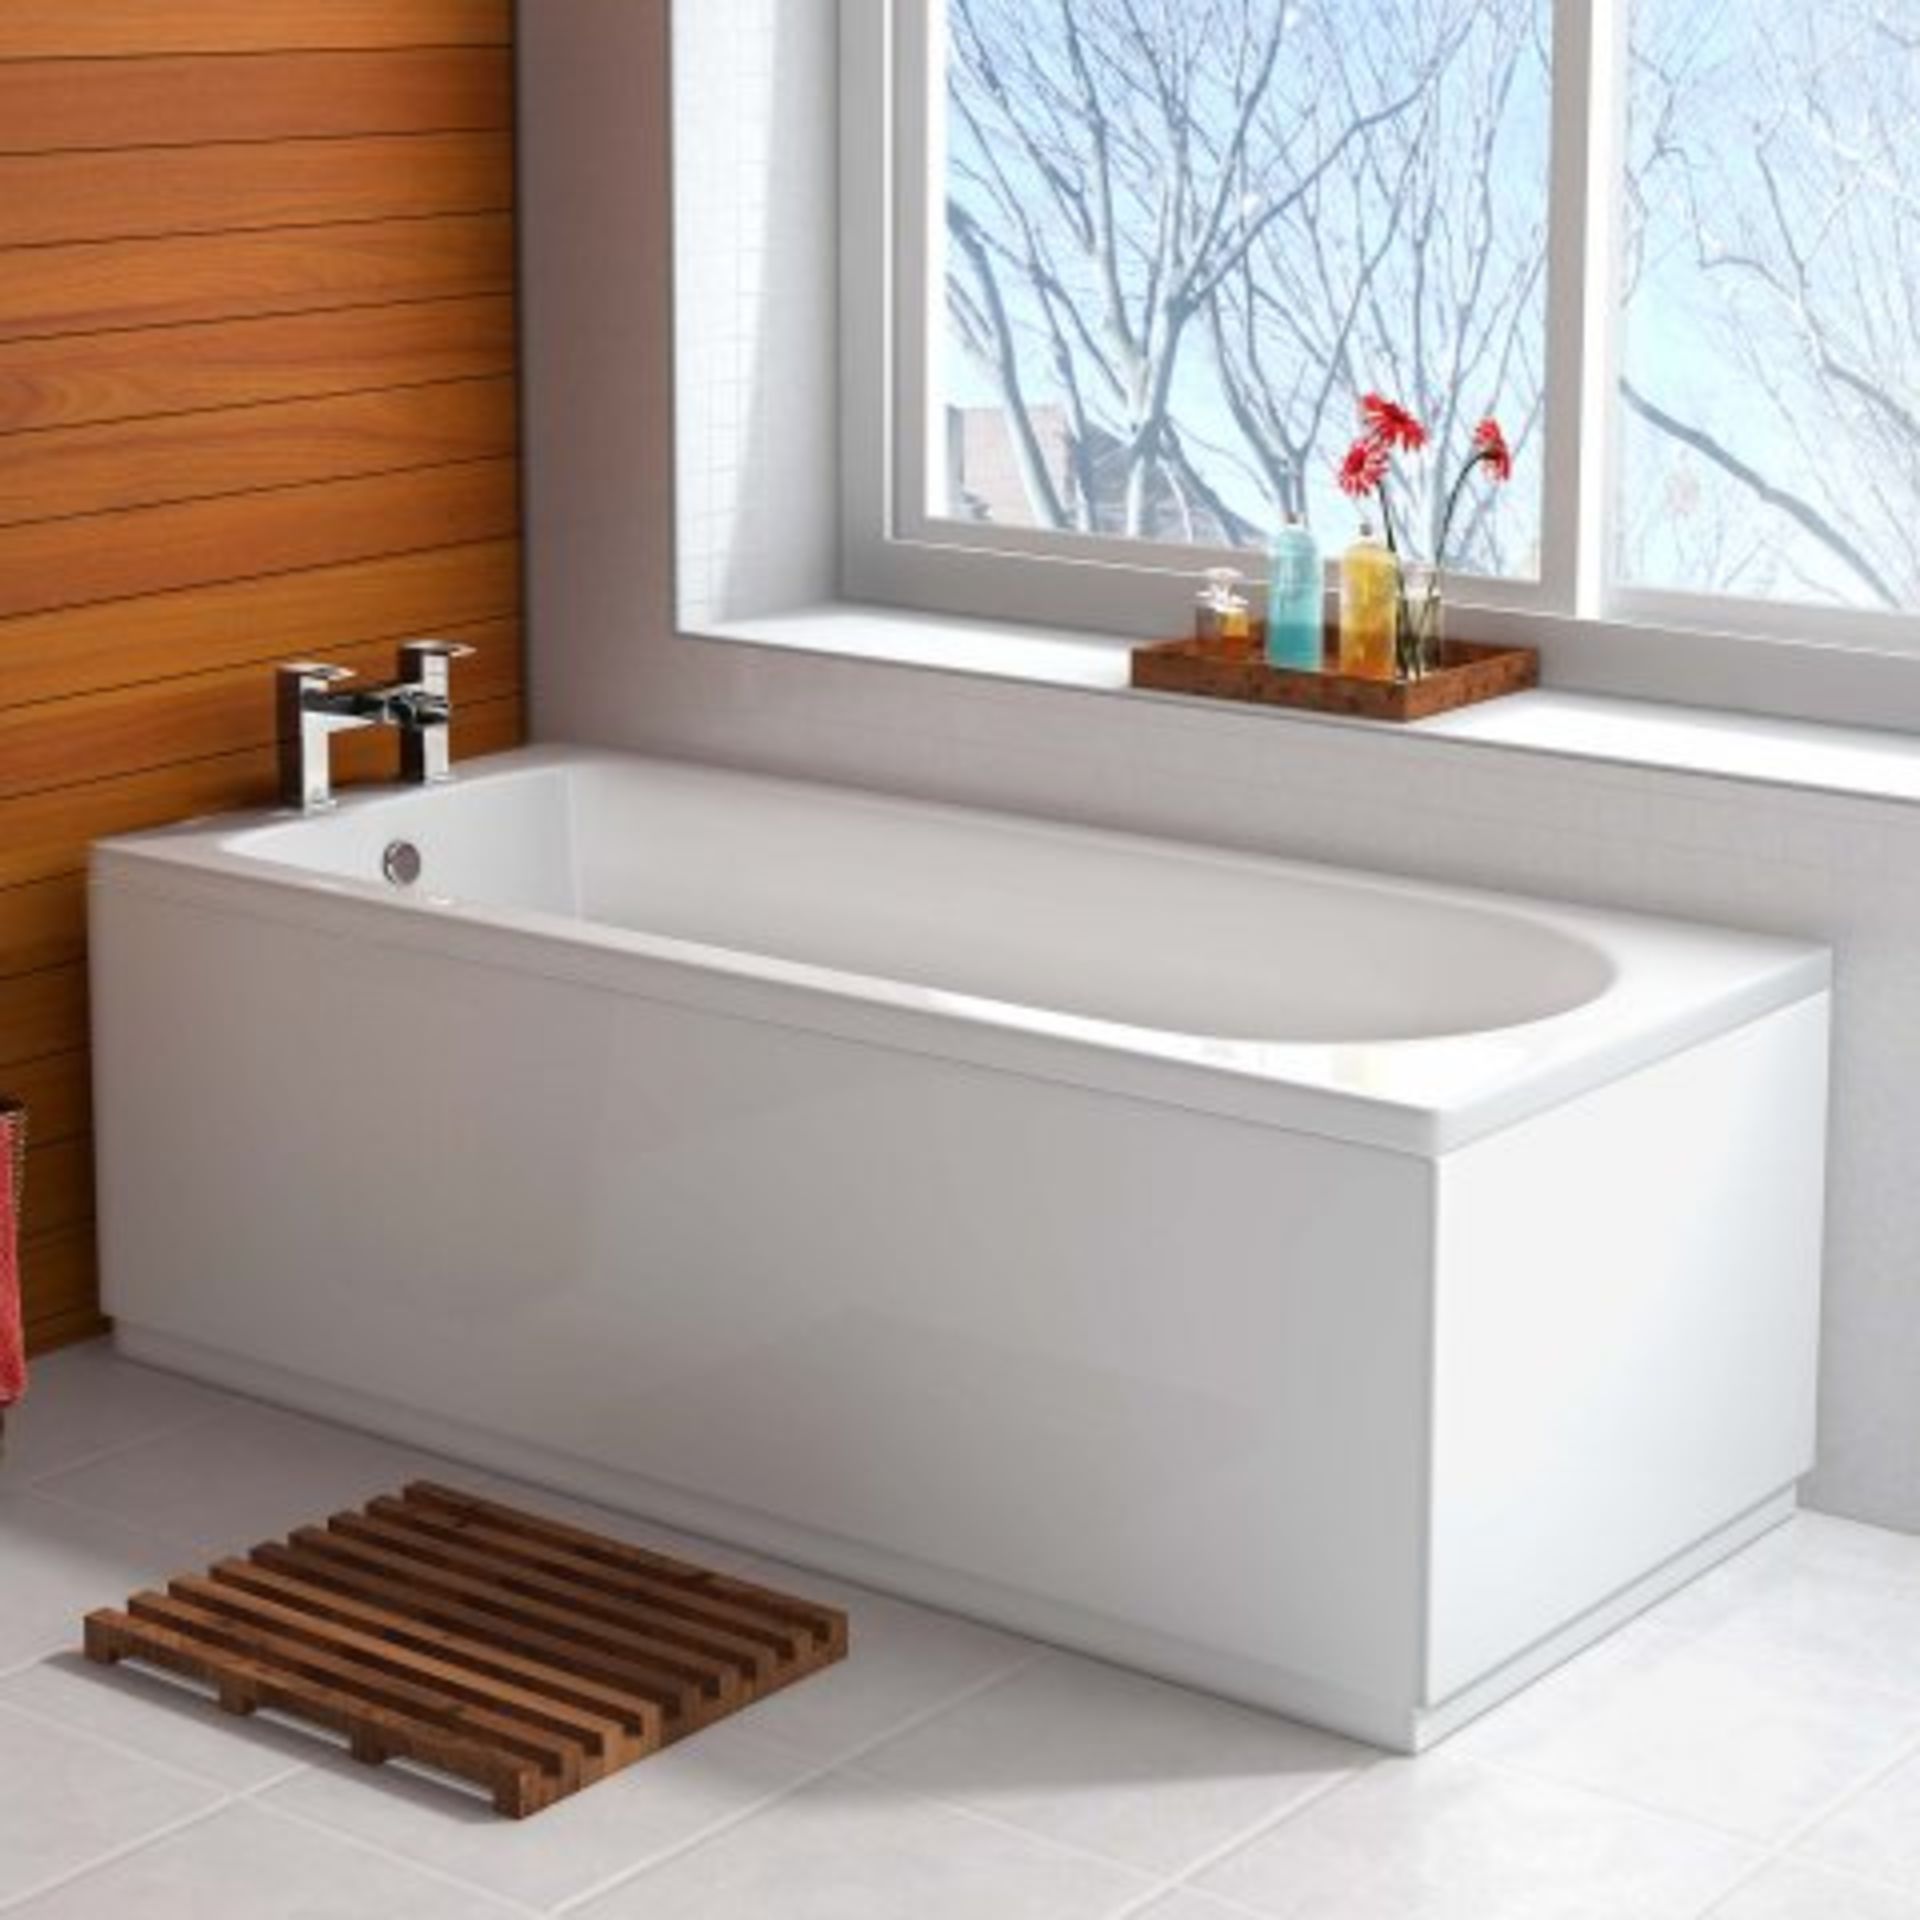 (P97) 1600x700x550mm Round Single Ended Bath. RRP £299.99. This brilliant white straight bath - Image 2 of 2